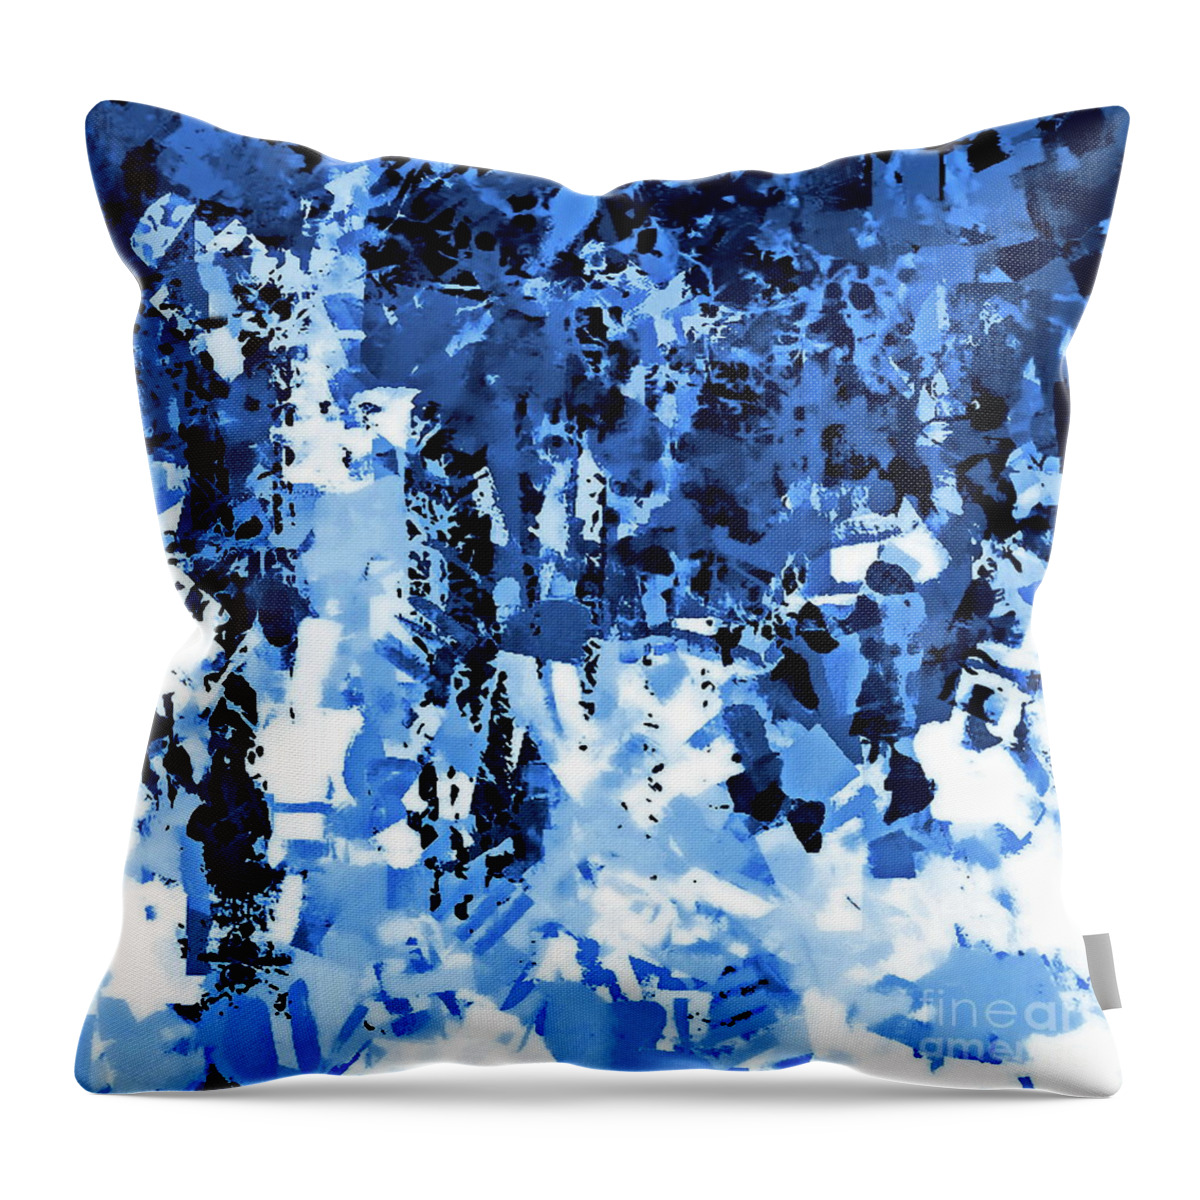 Digital Clone Painting Throw Pillow featuring the painting Winter Forest by Tim Richards